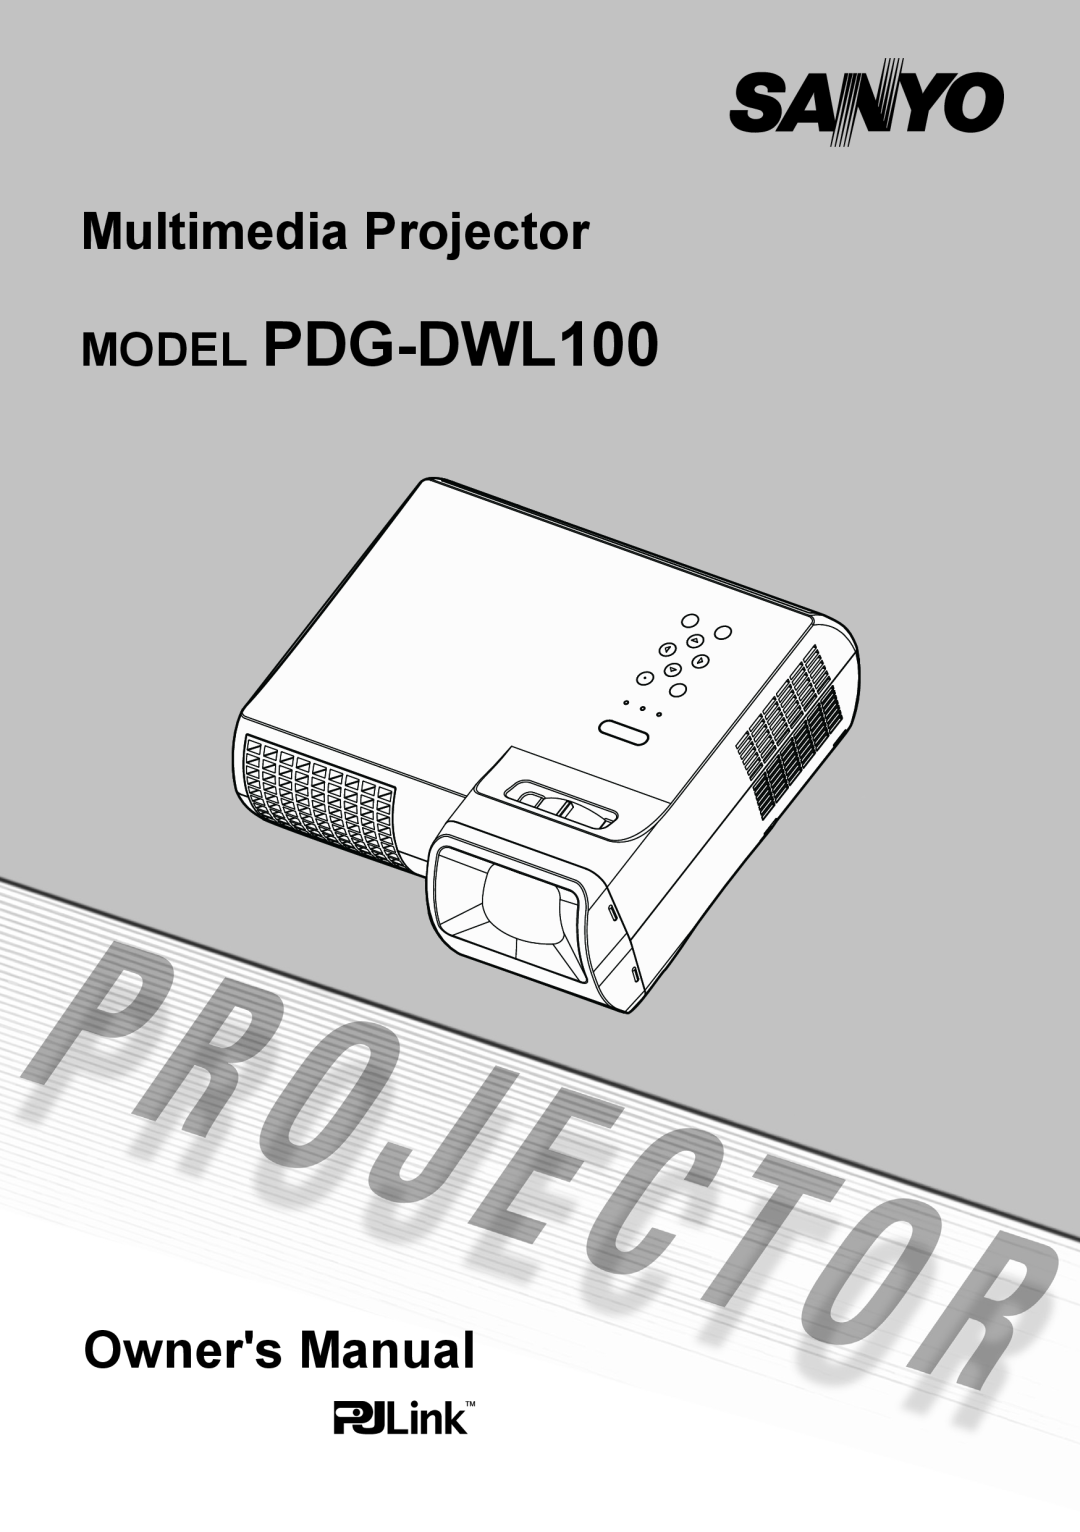 Sanyo owner manual MODEL PDG-DWL100, Quick Reference Guide, Multimedia Projector 